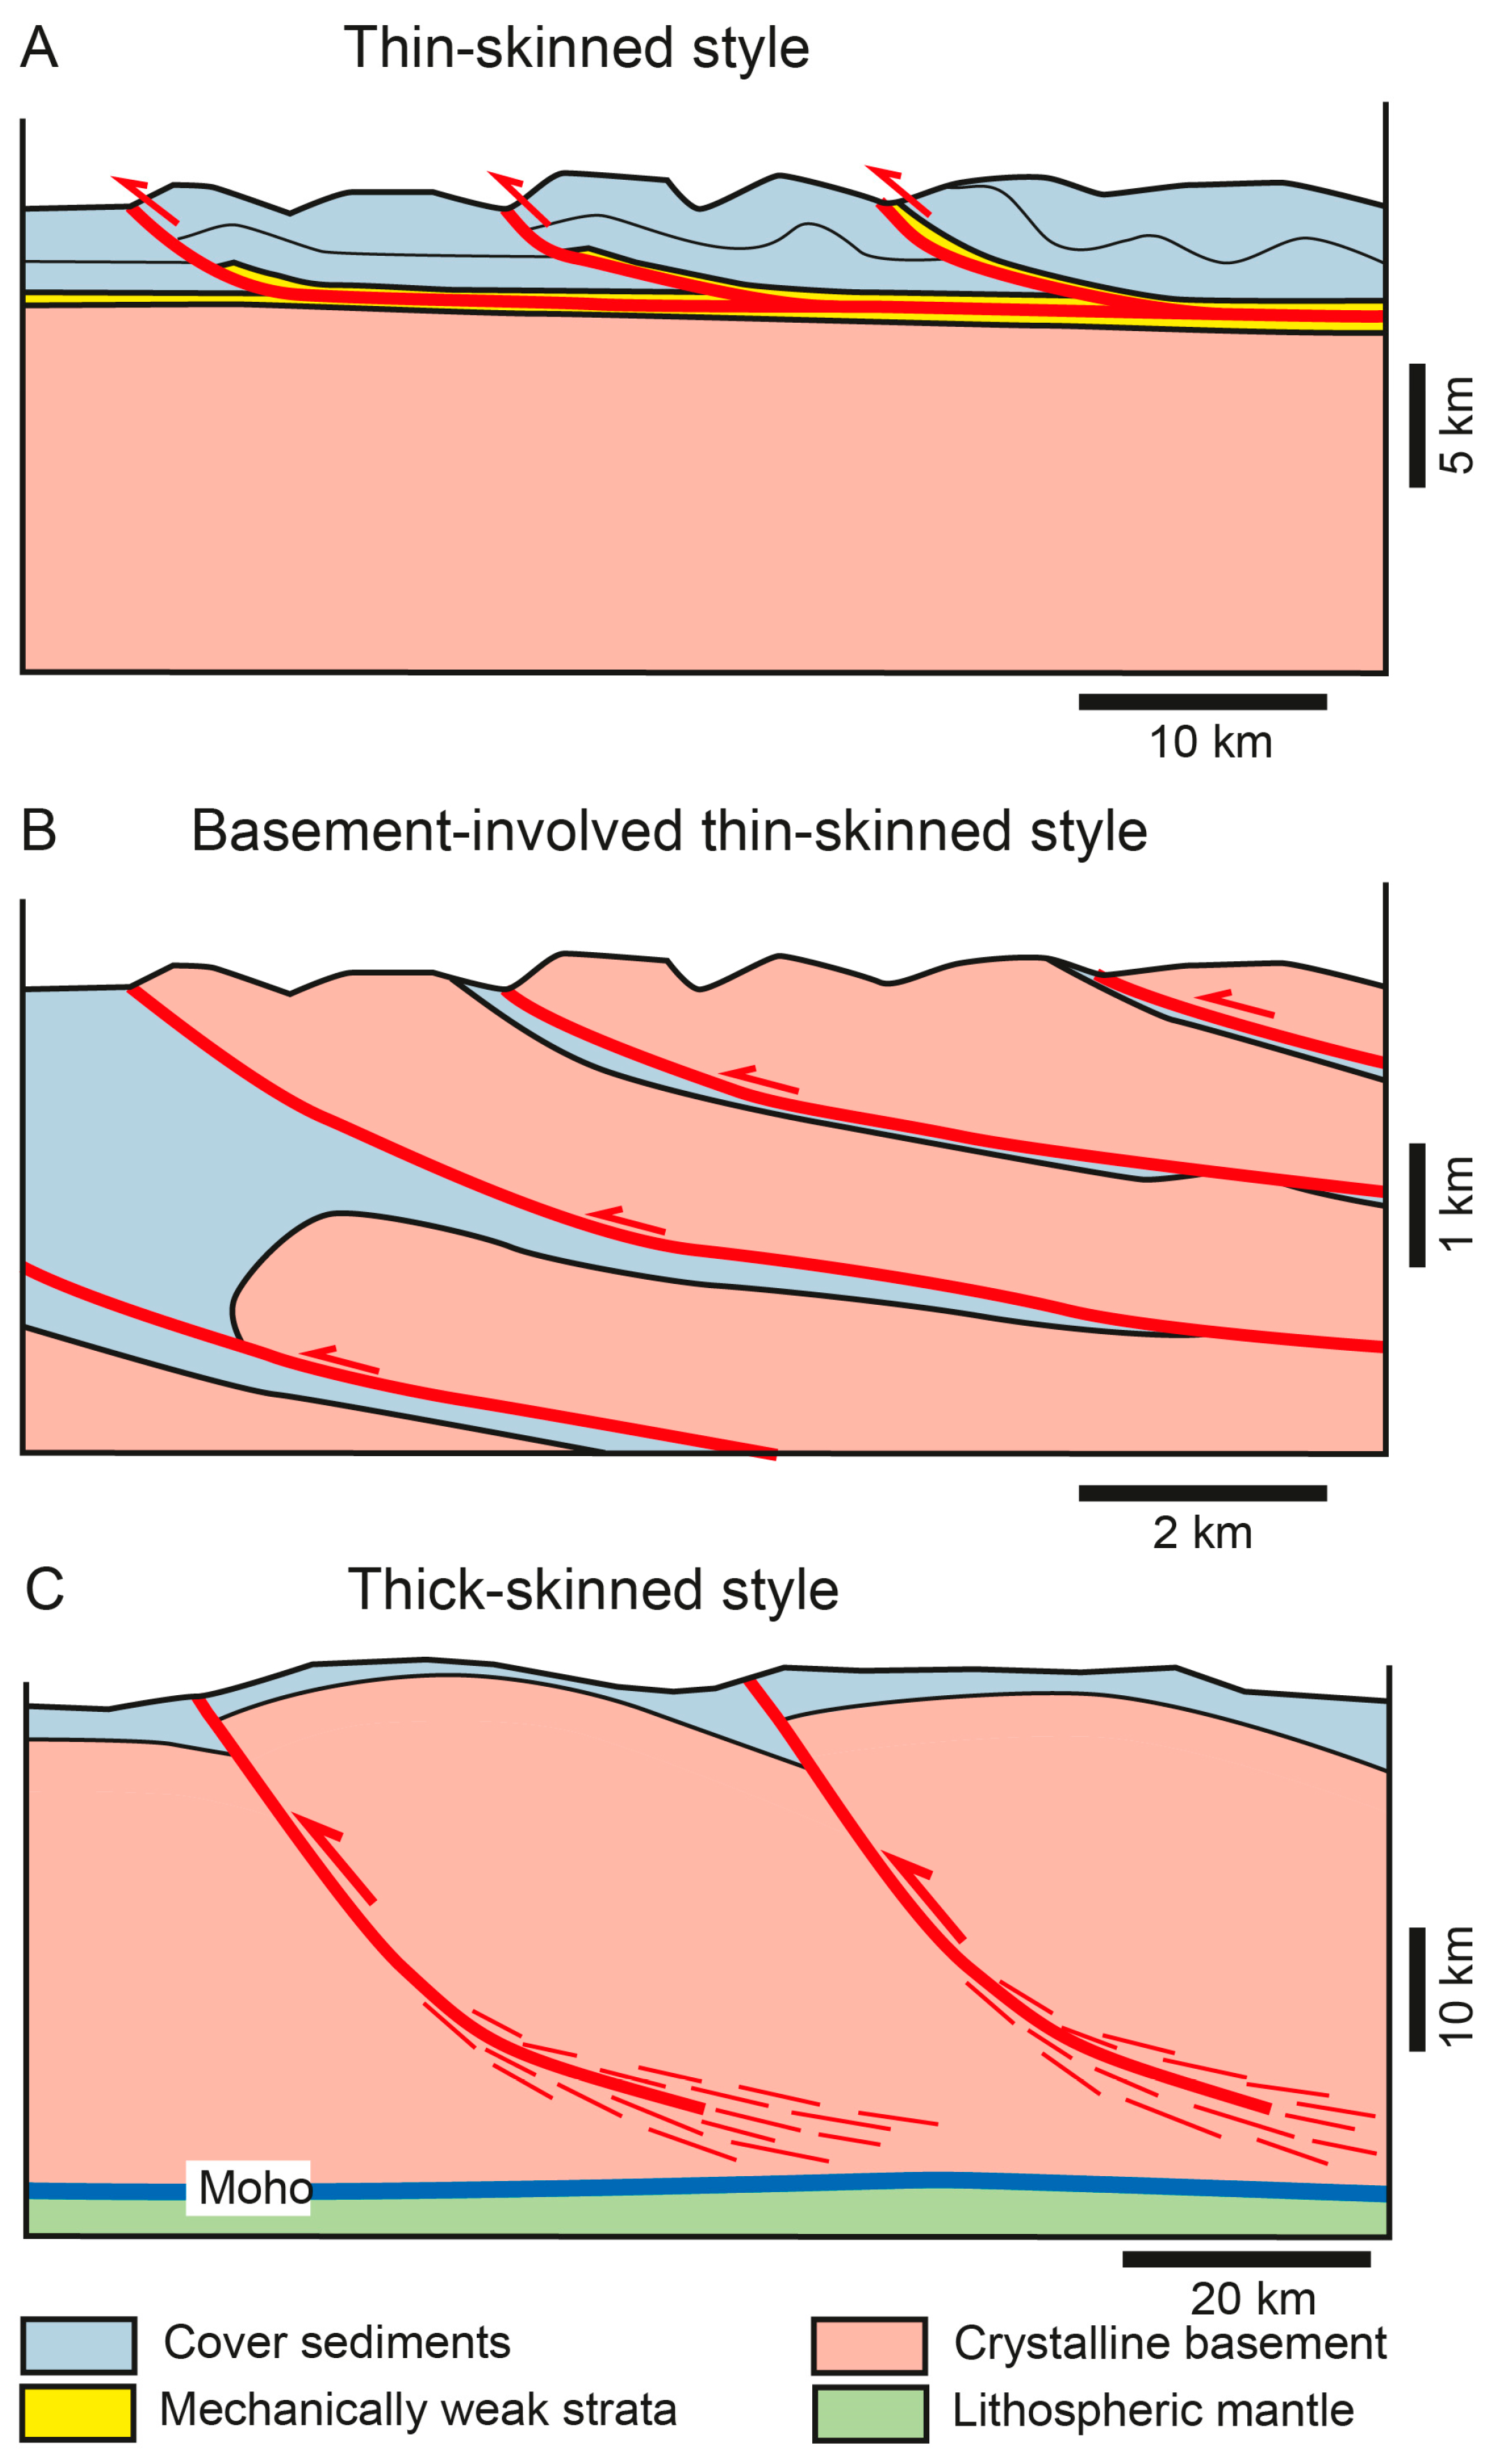 Geosciences | Free Full-Text | Thick-Skinned and Thin-Skinned